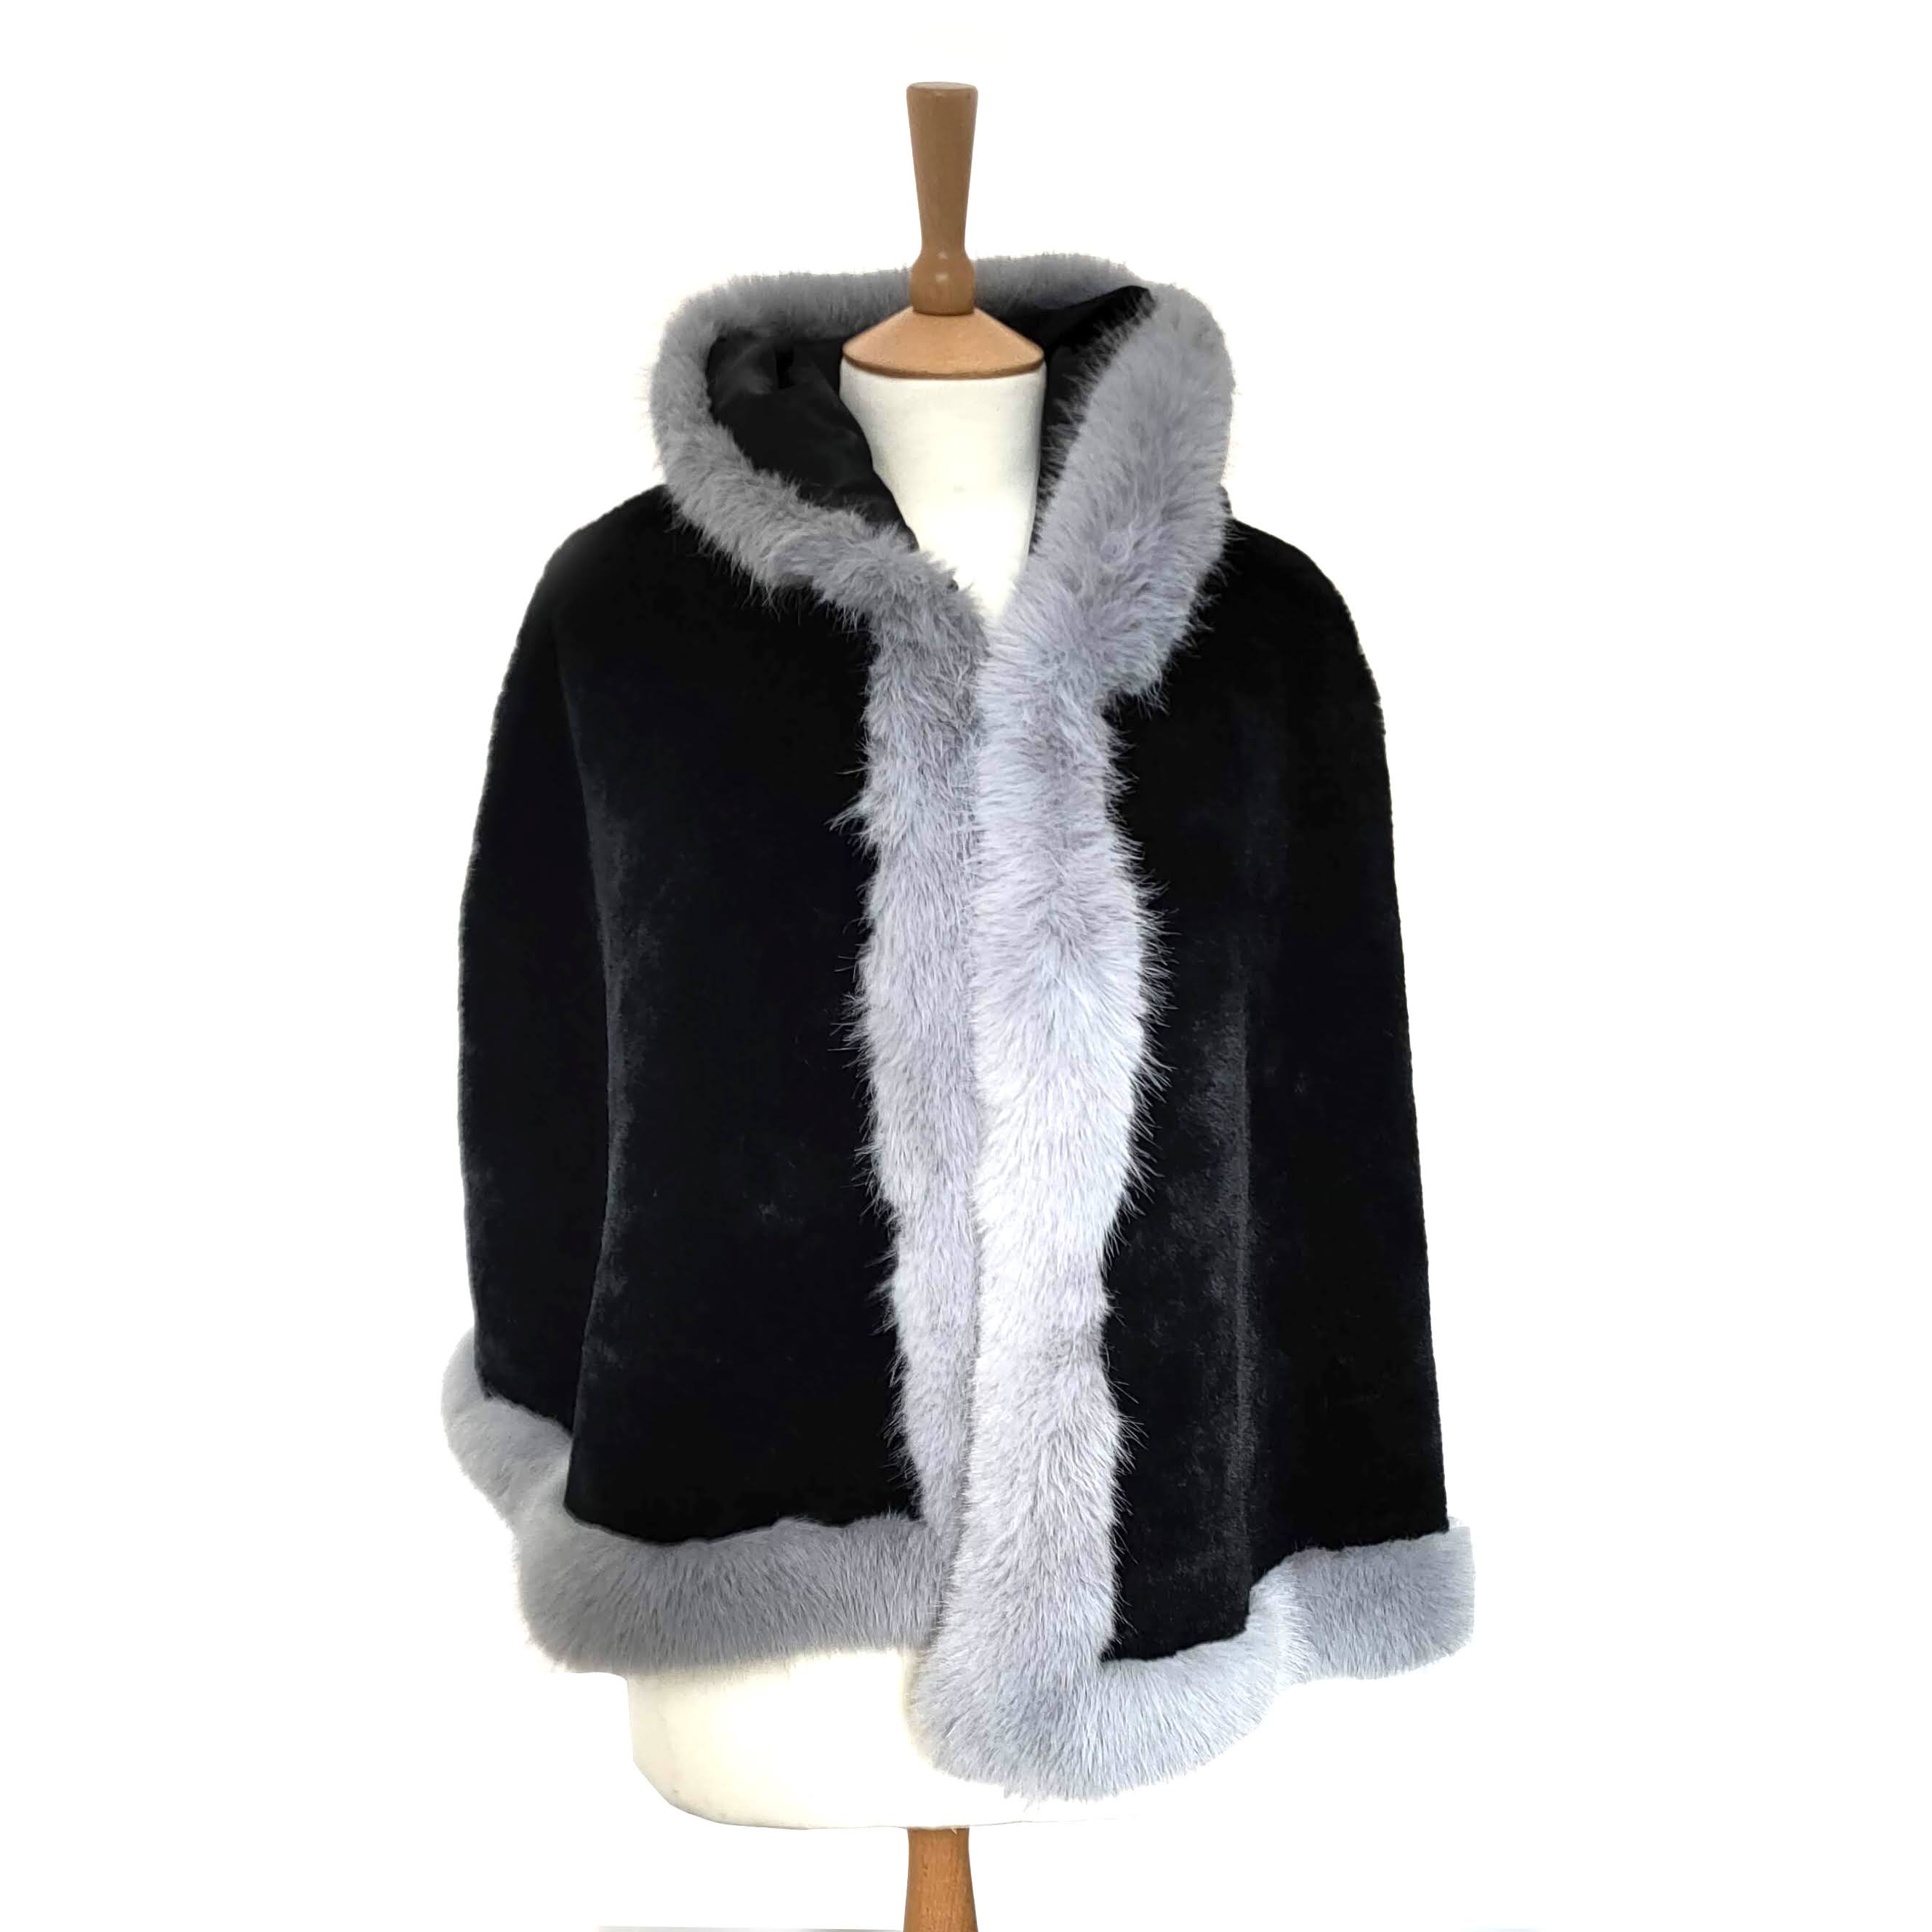 Black and Grey Fur Fur Cape with Hood